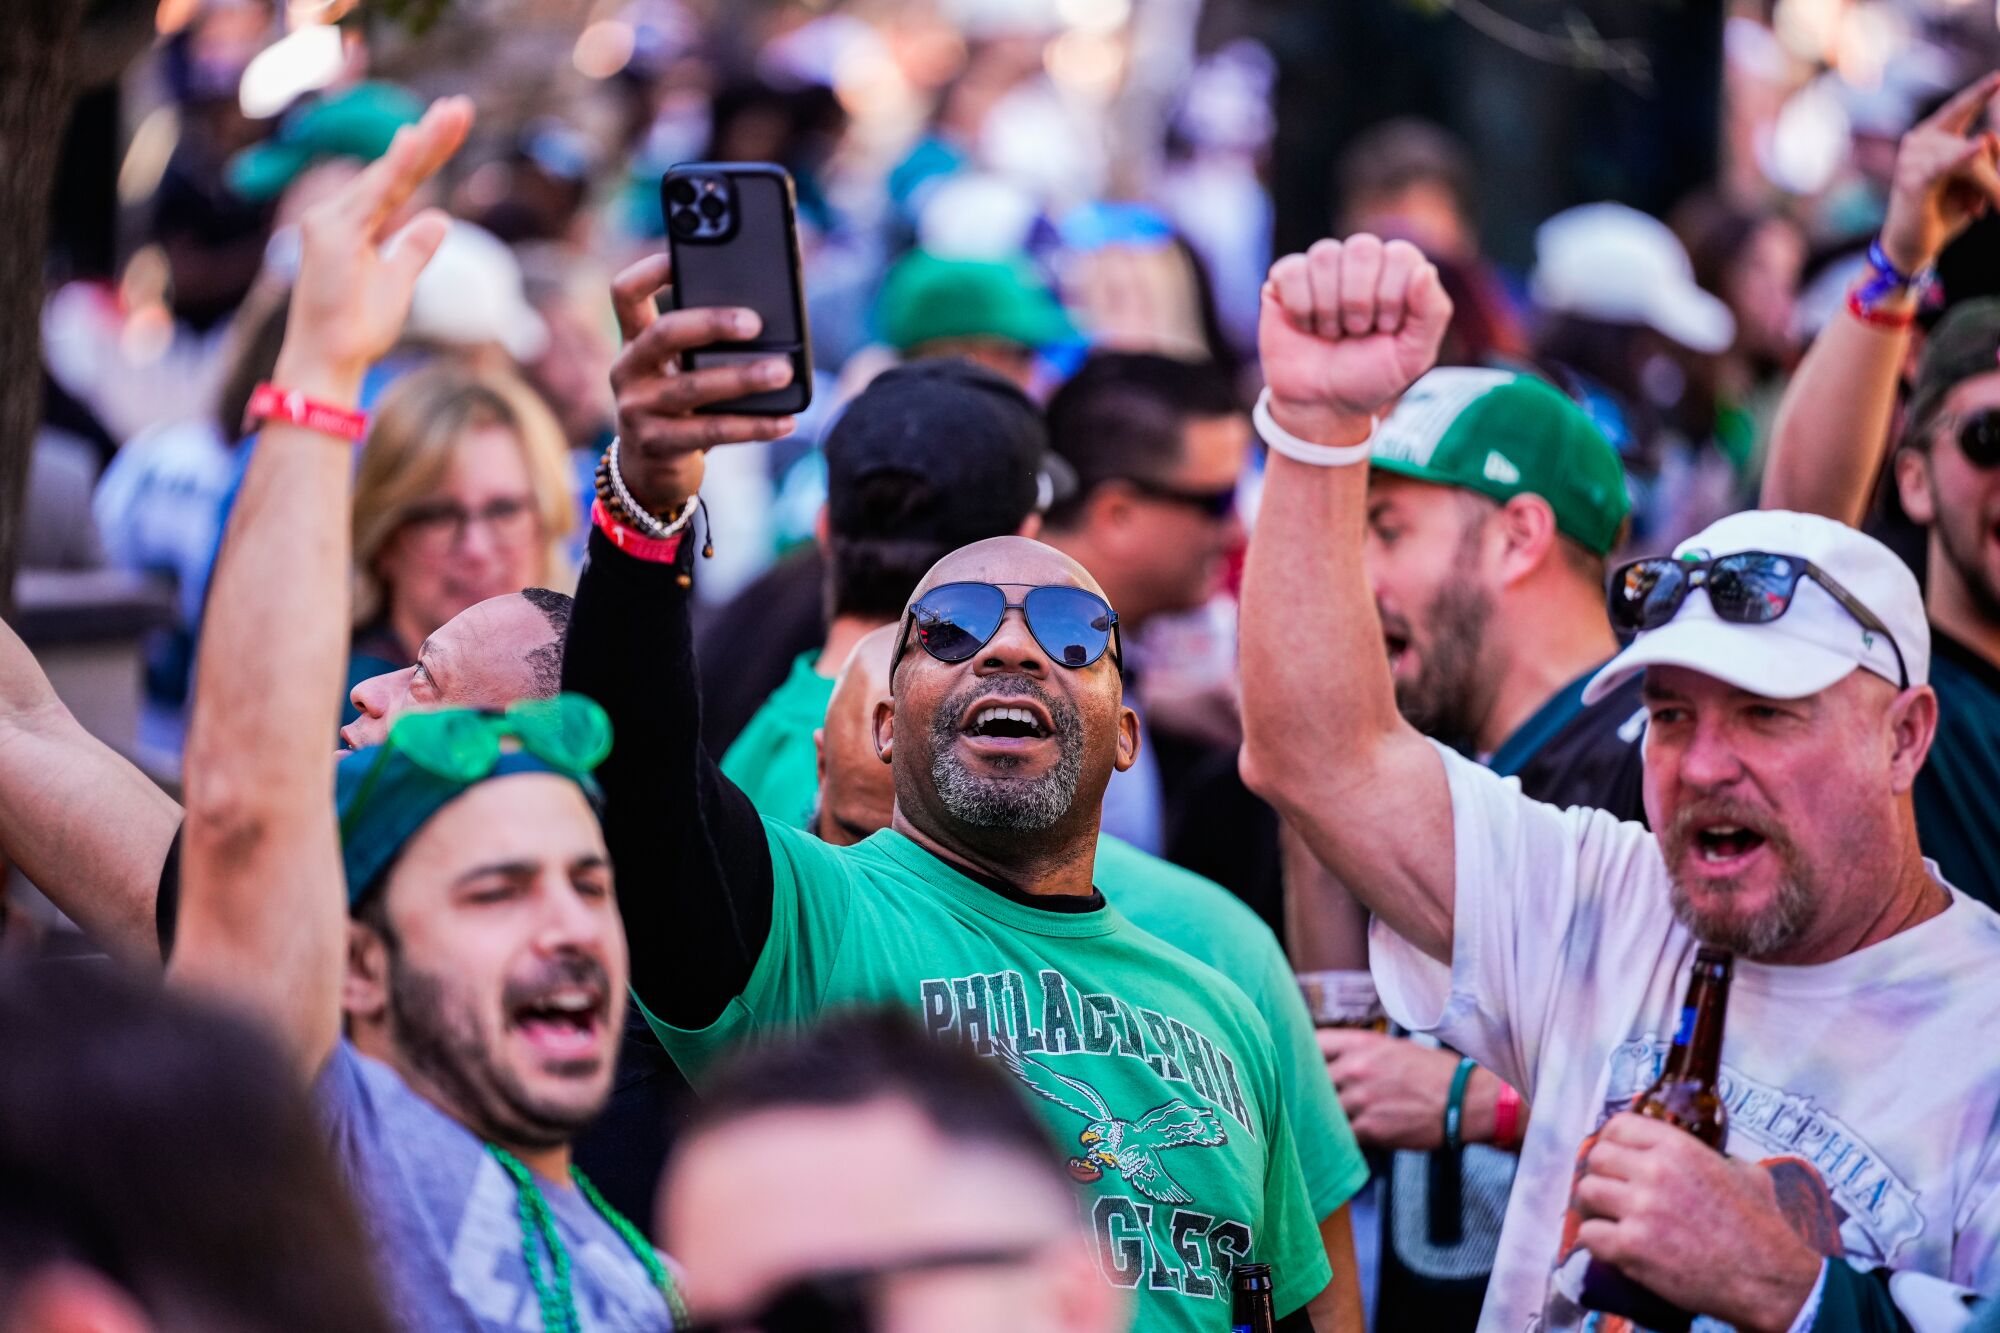 Eagles fans take selfies and gather outside McFadden's Restaurant and Saloon ahead of the Super Bowl.